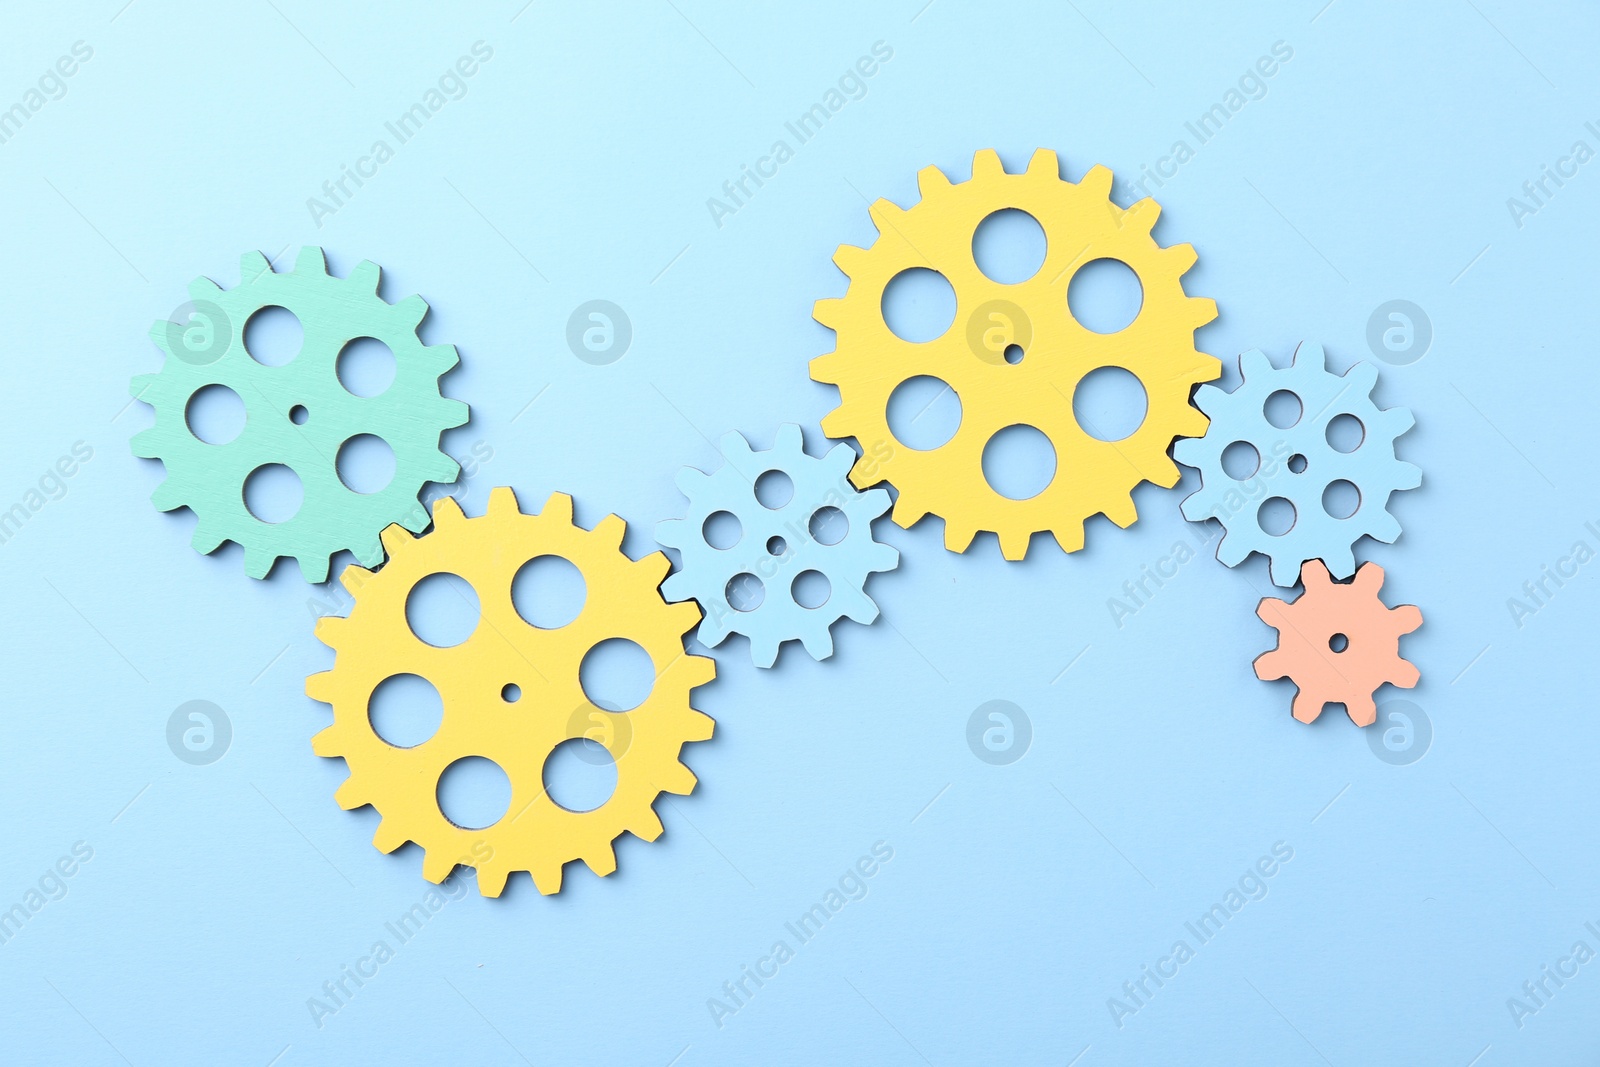 Photo of Business process organization and optimization. Scheme with colorful figures on light blue background, top view